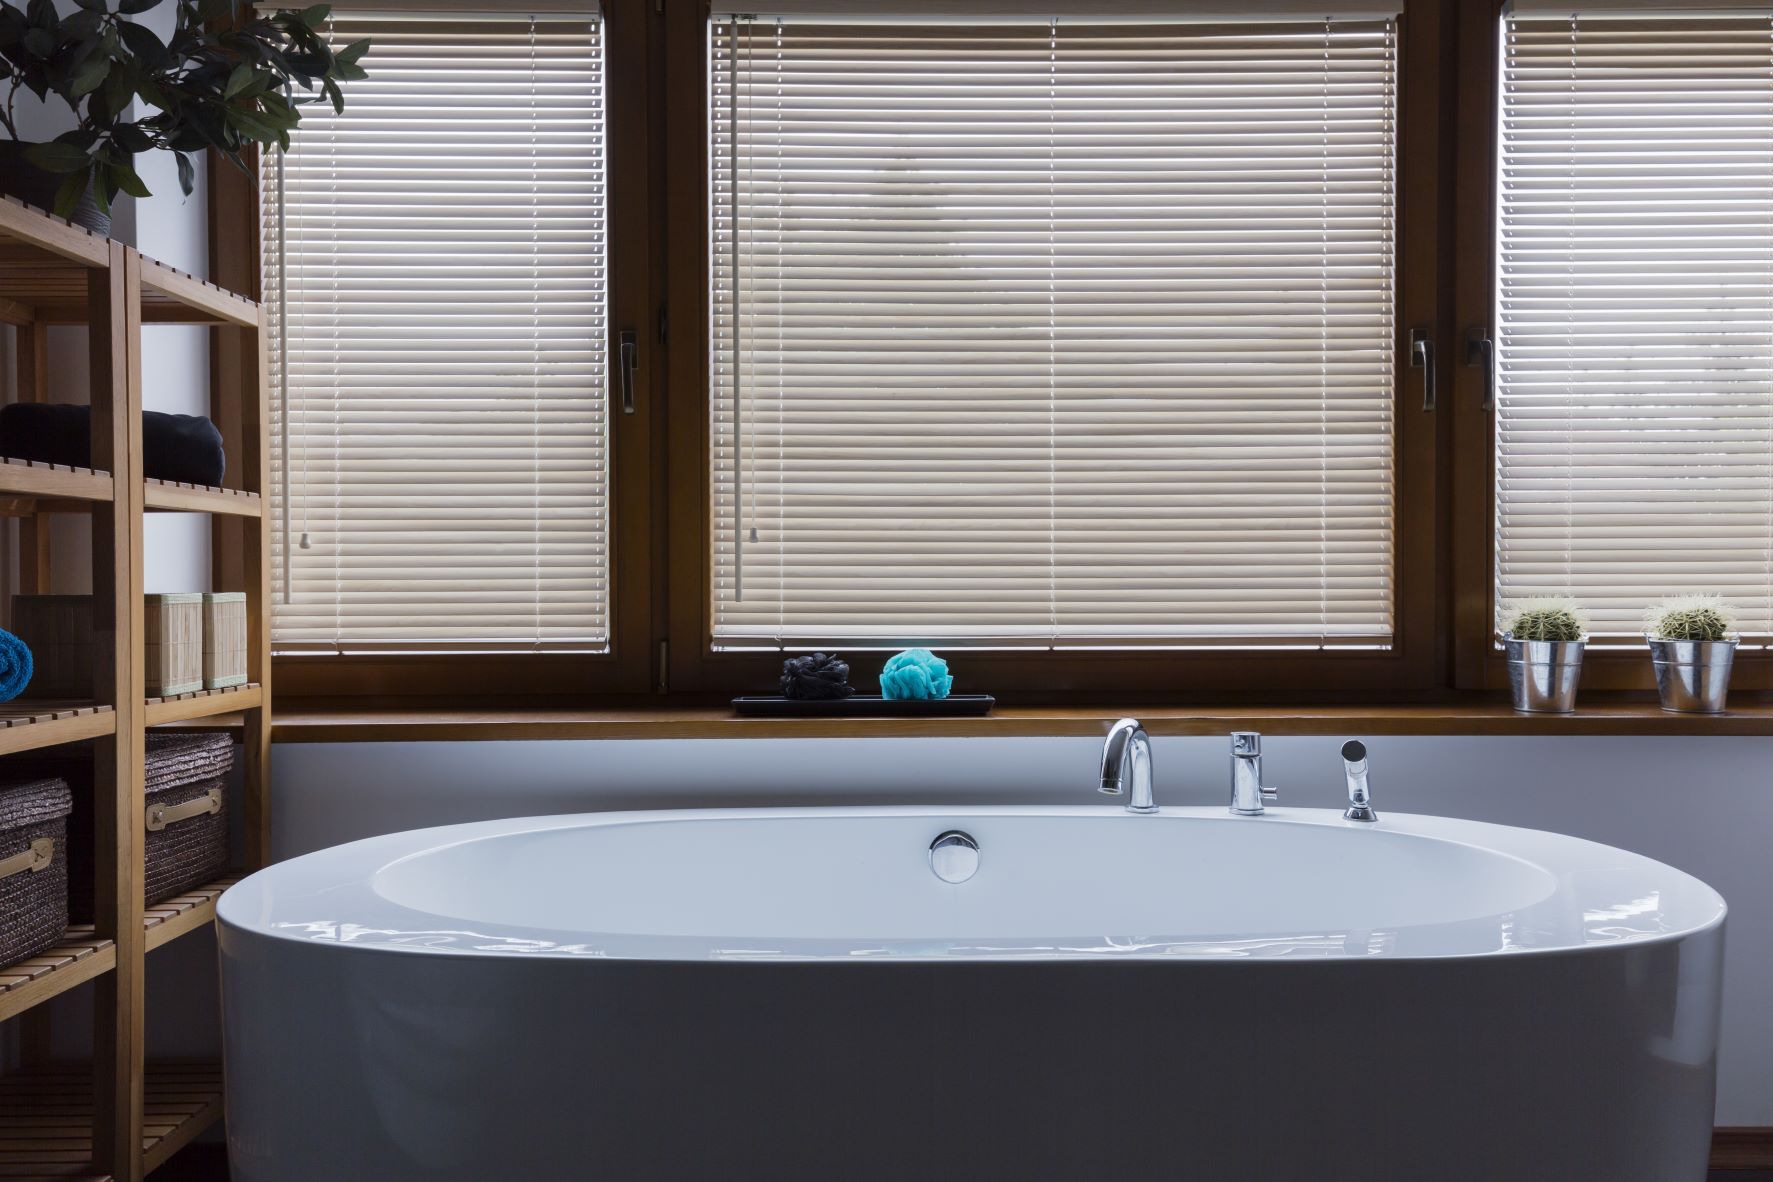 windows with closed venetian blinds over a large tub